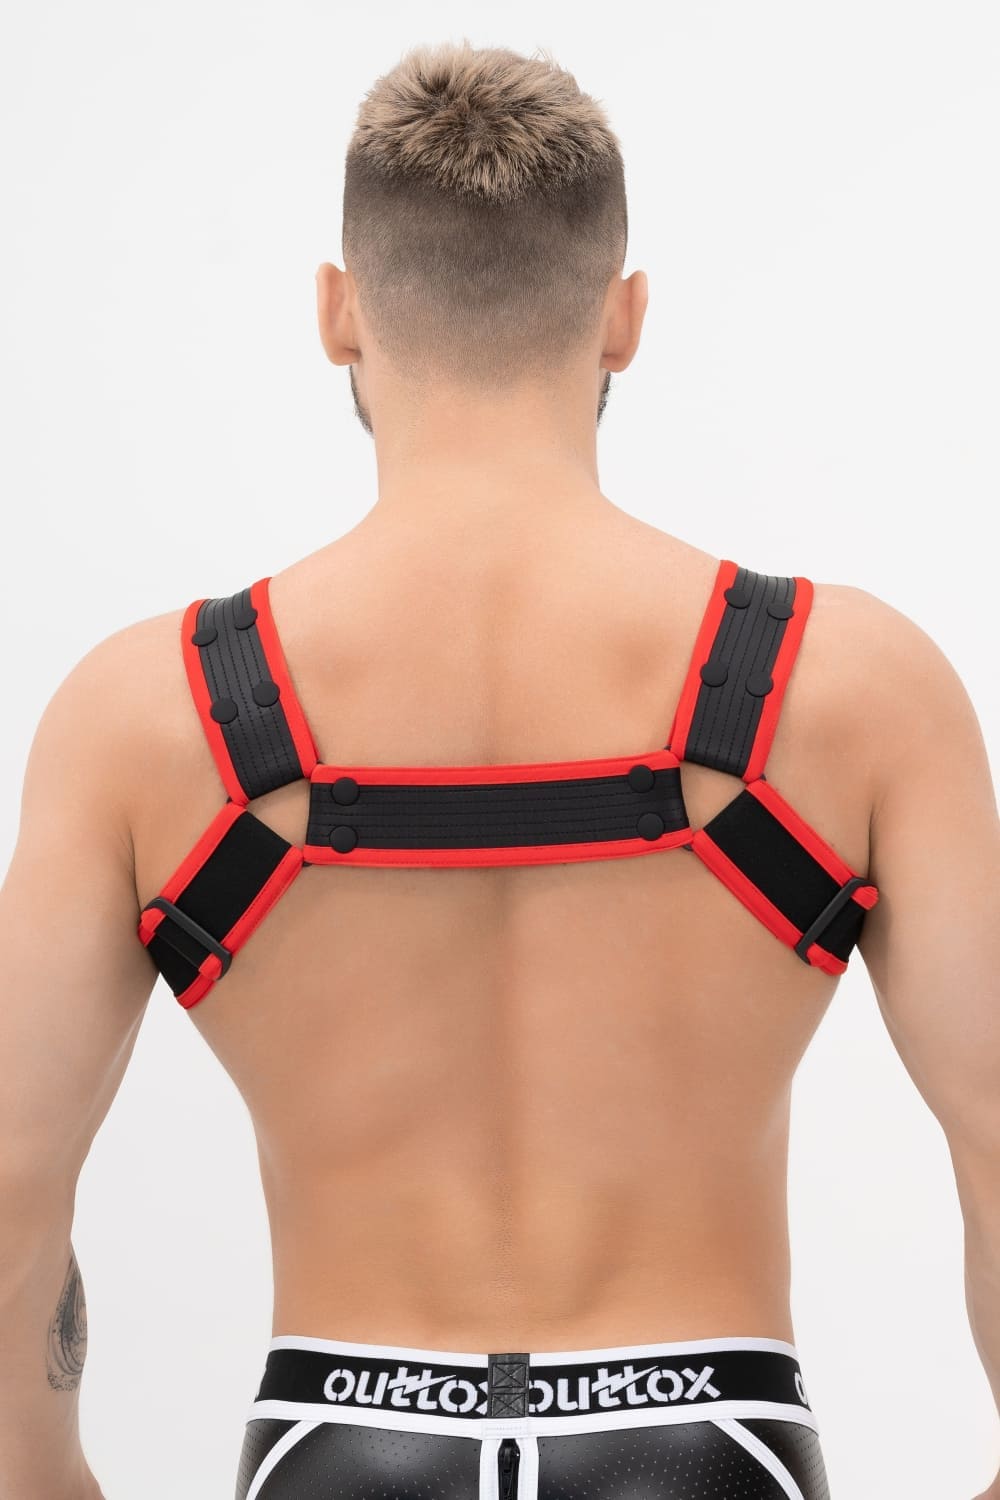 Outtox. Body Harness with Snaps. Black+Red